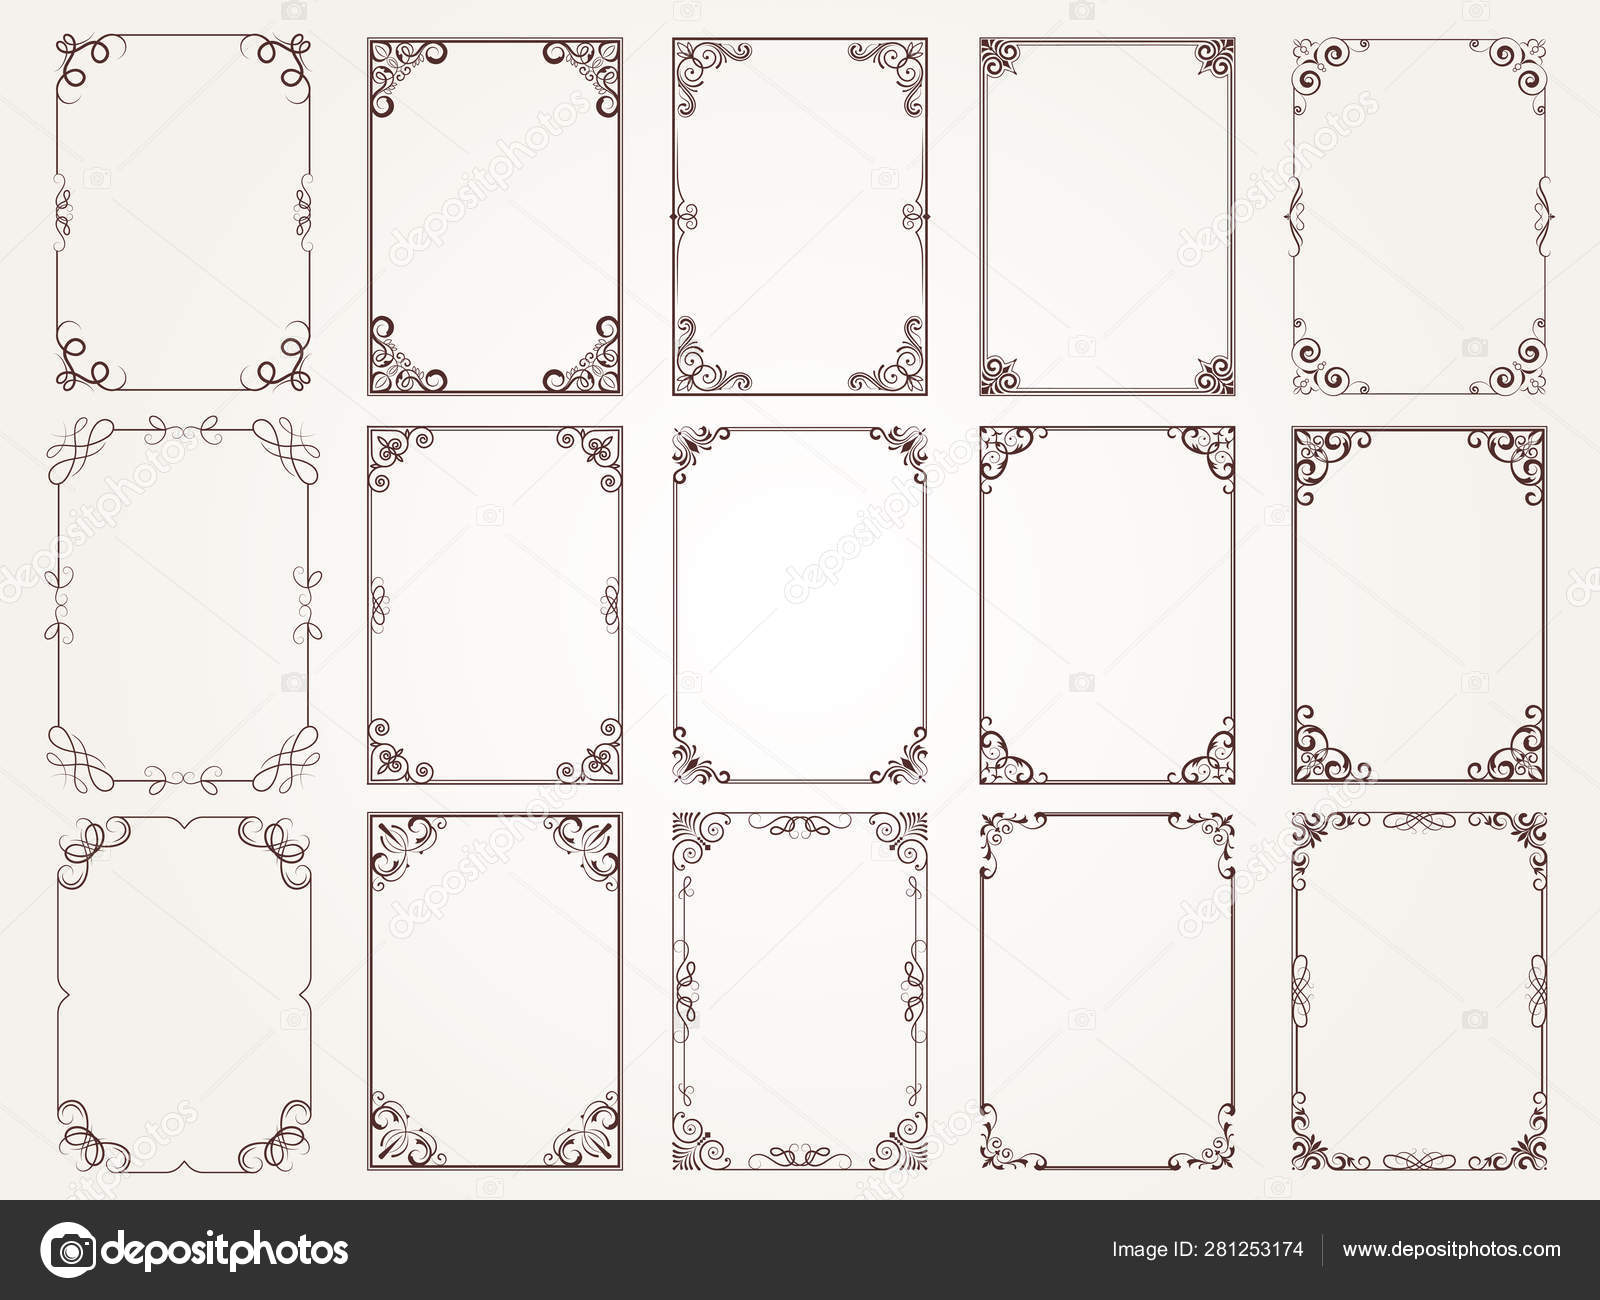 Calligraphic Frames Borders Corners Ornate Frames For Certificate Floral Classic Vector Designs Collection Stock Vector Image By C Onyxprj